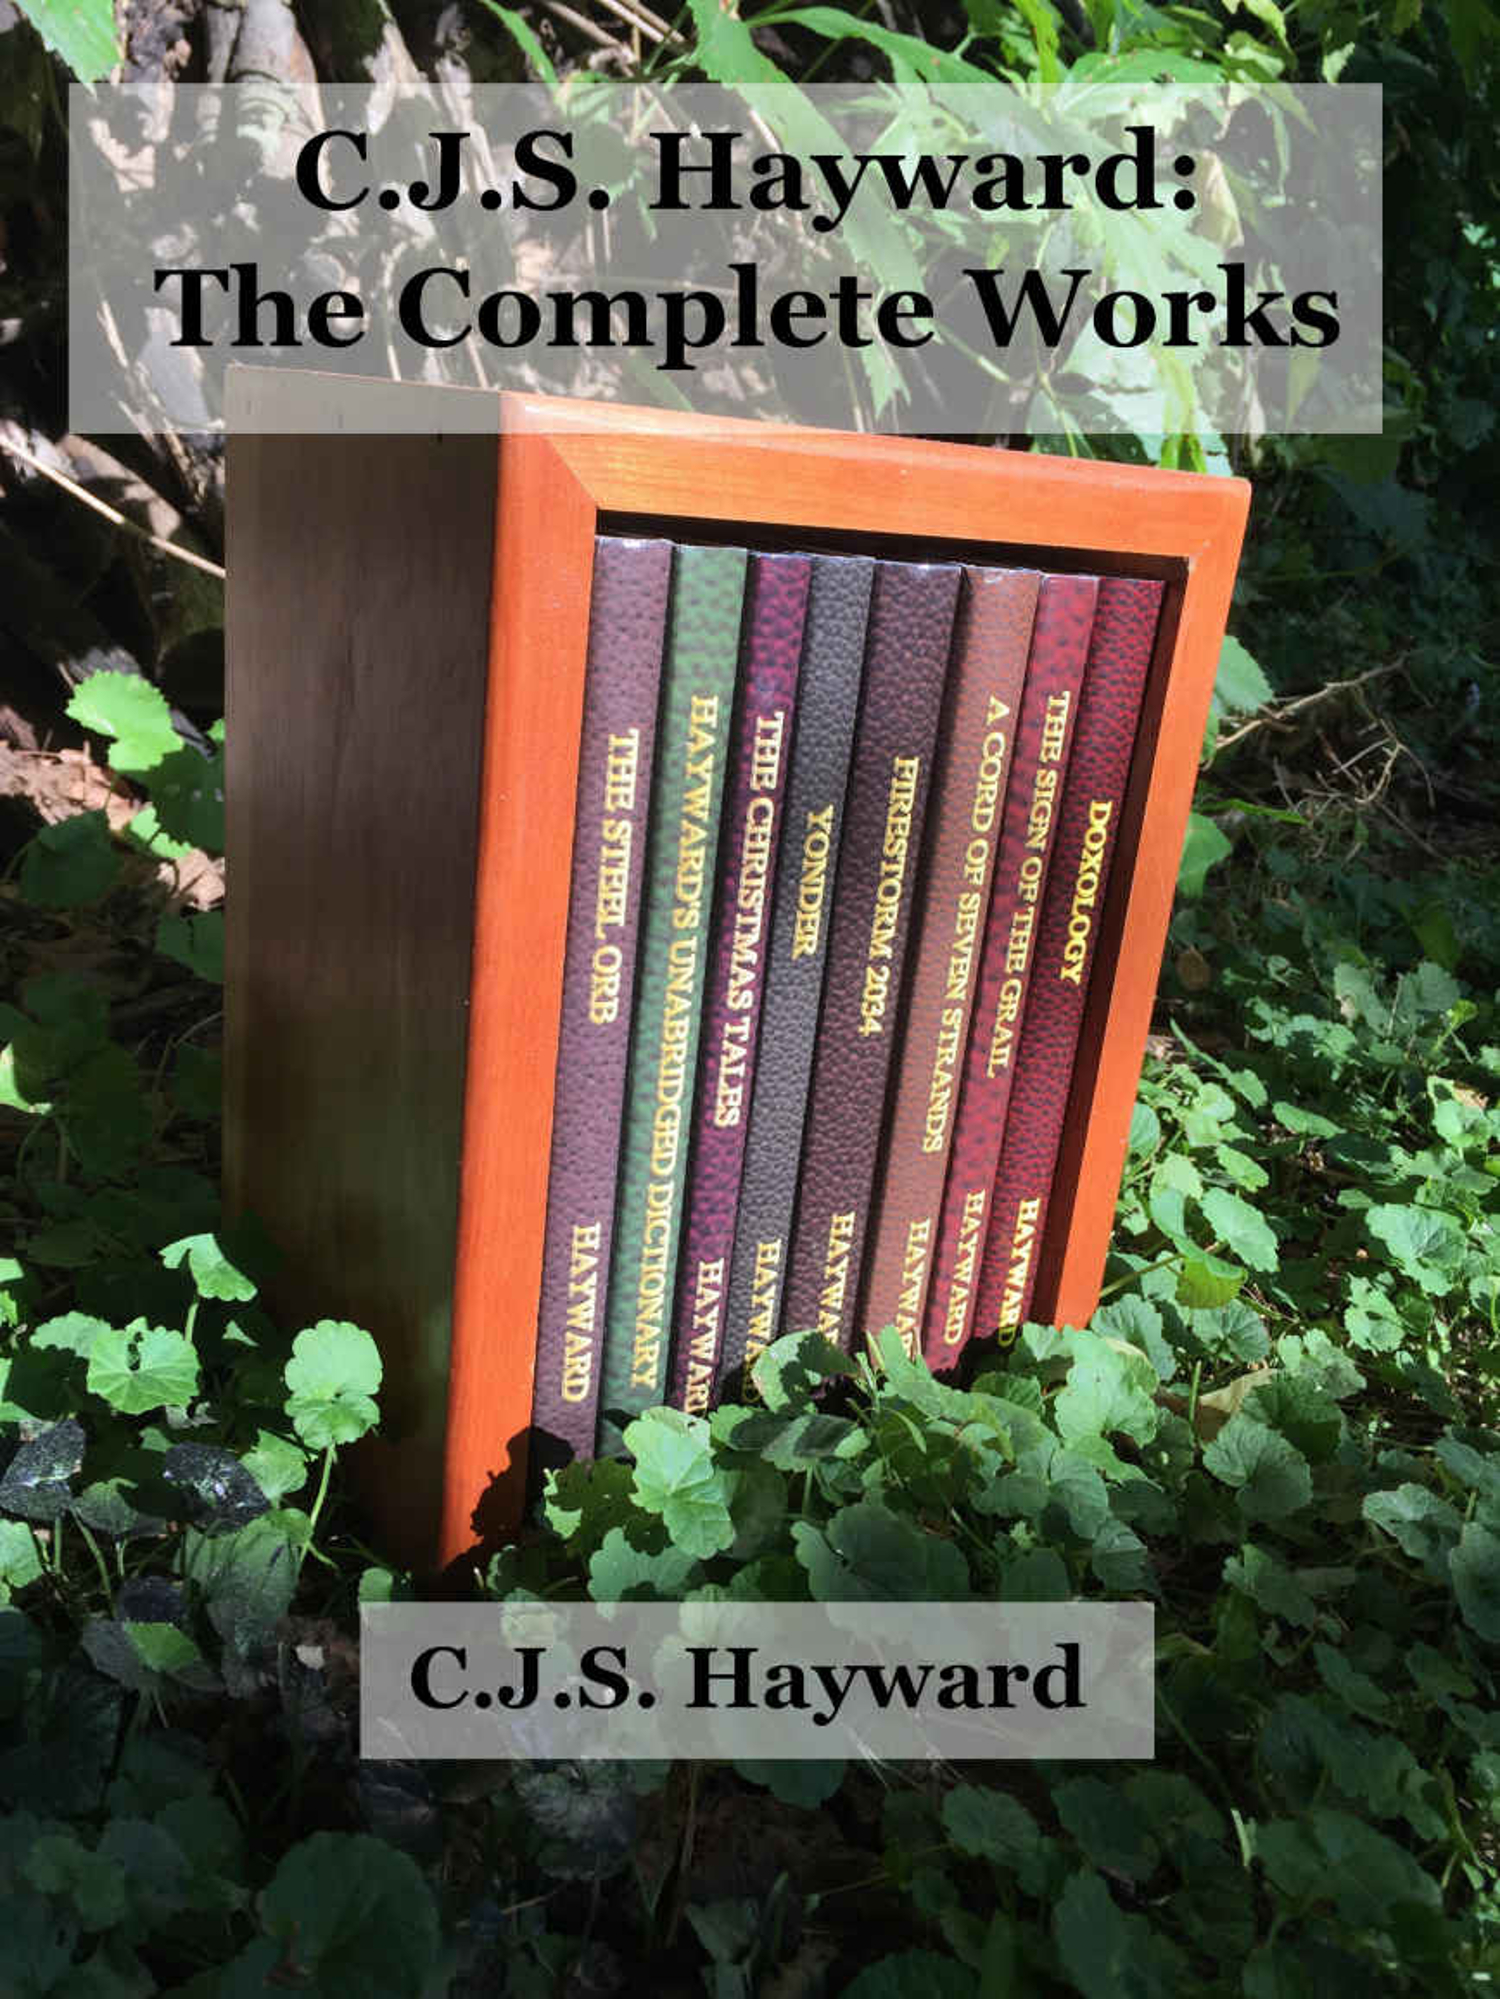 The cover to CJS Hayward's "The Complete Works" collection